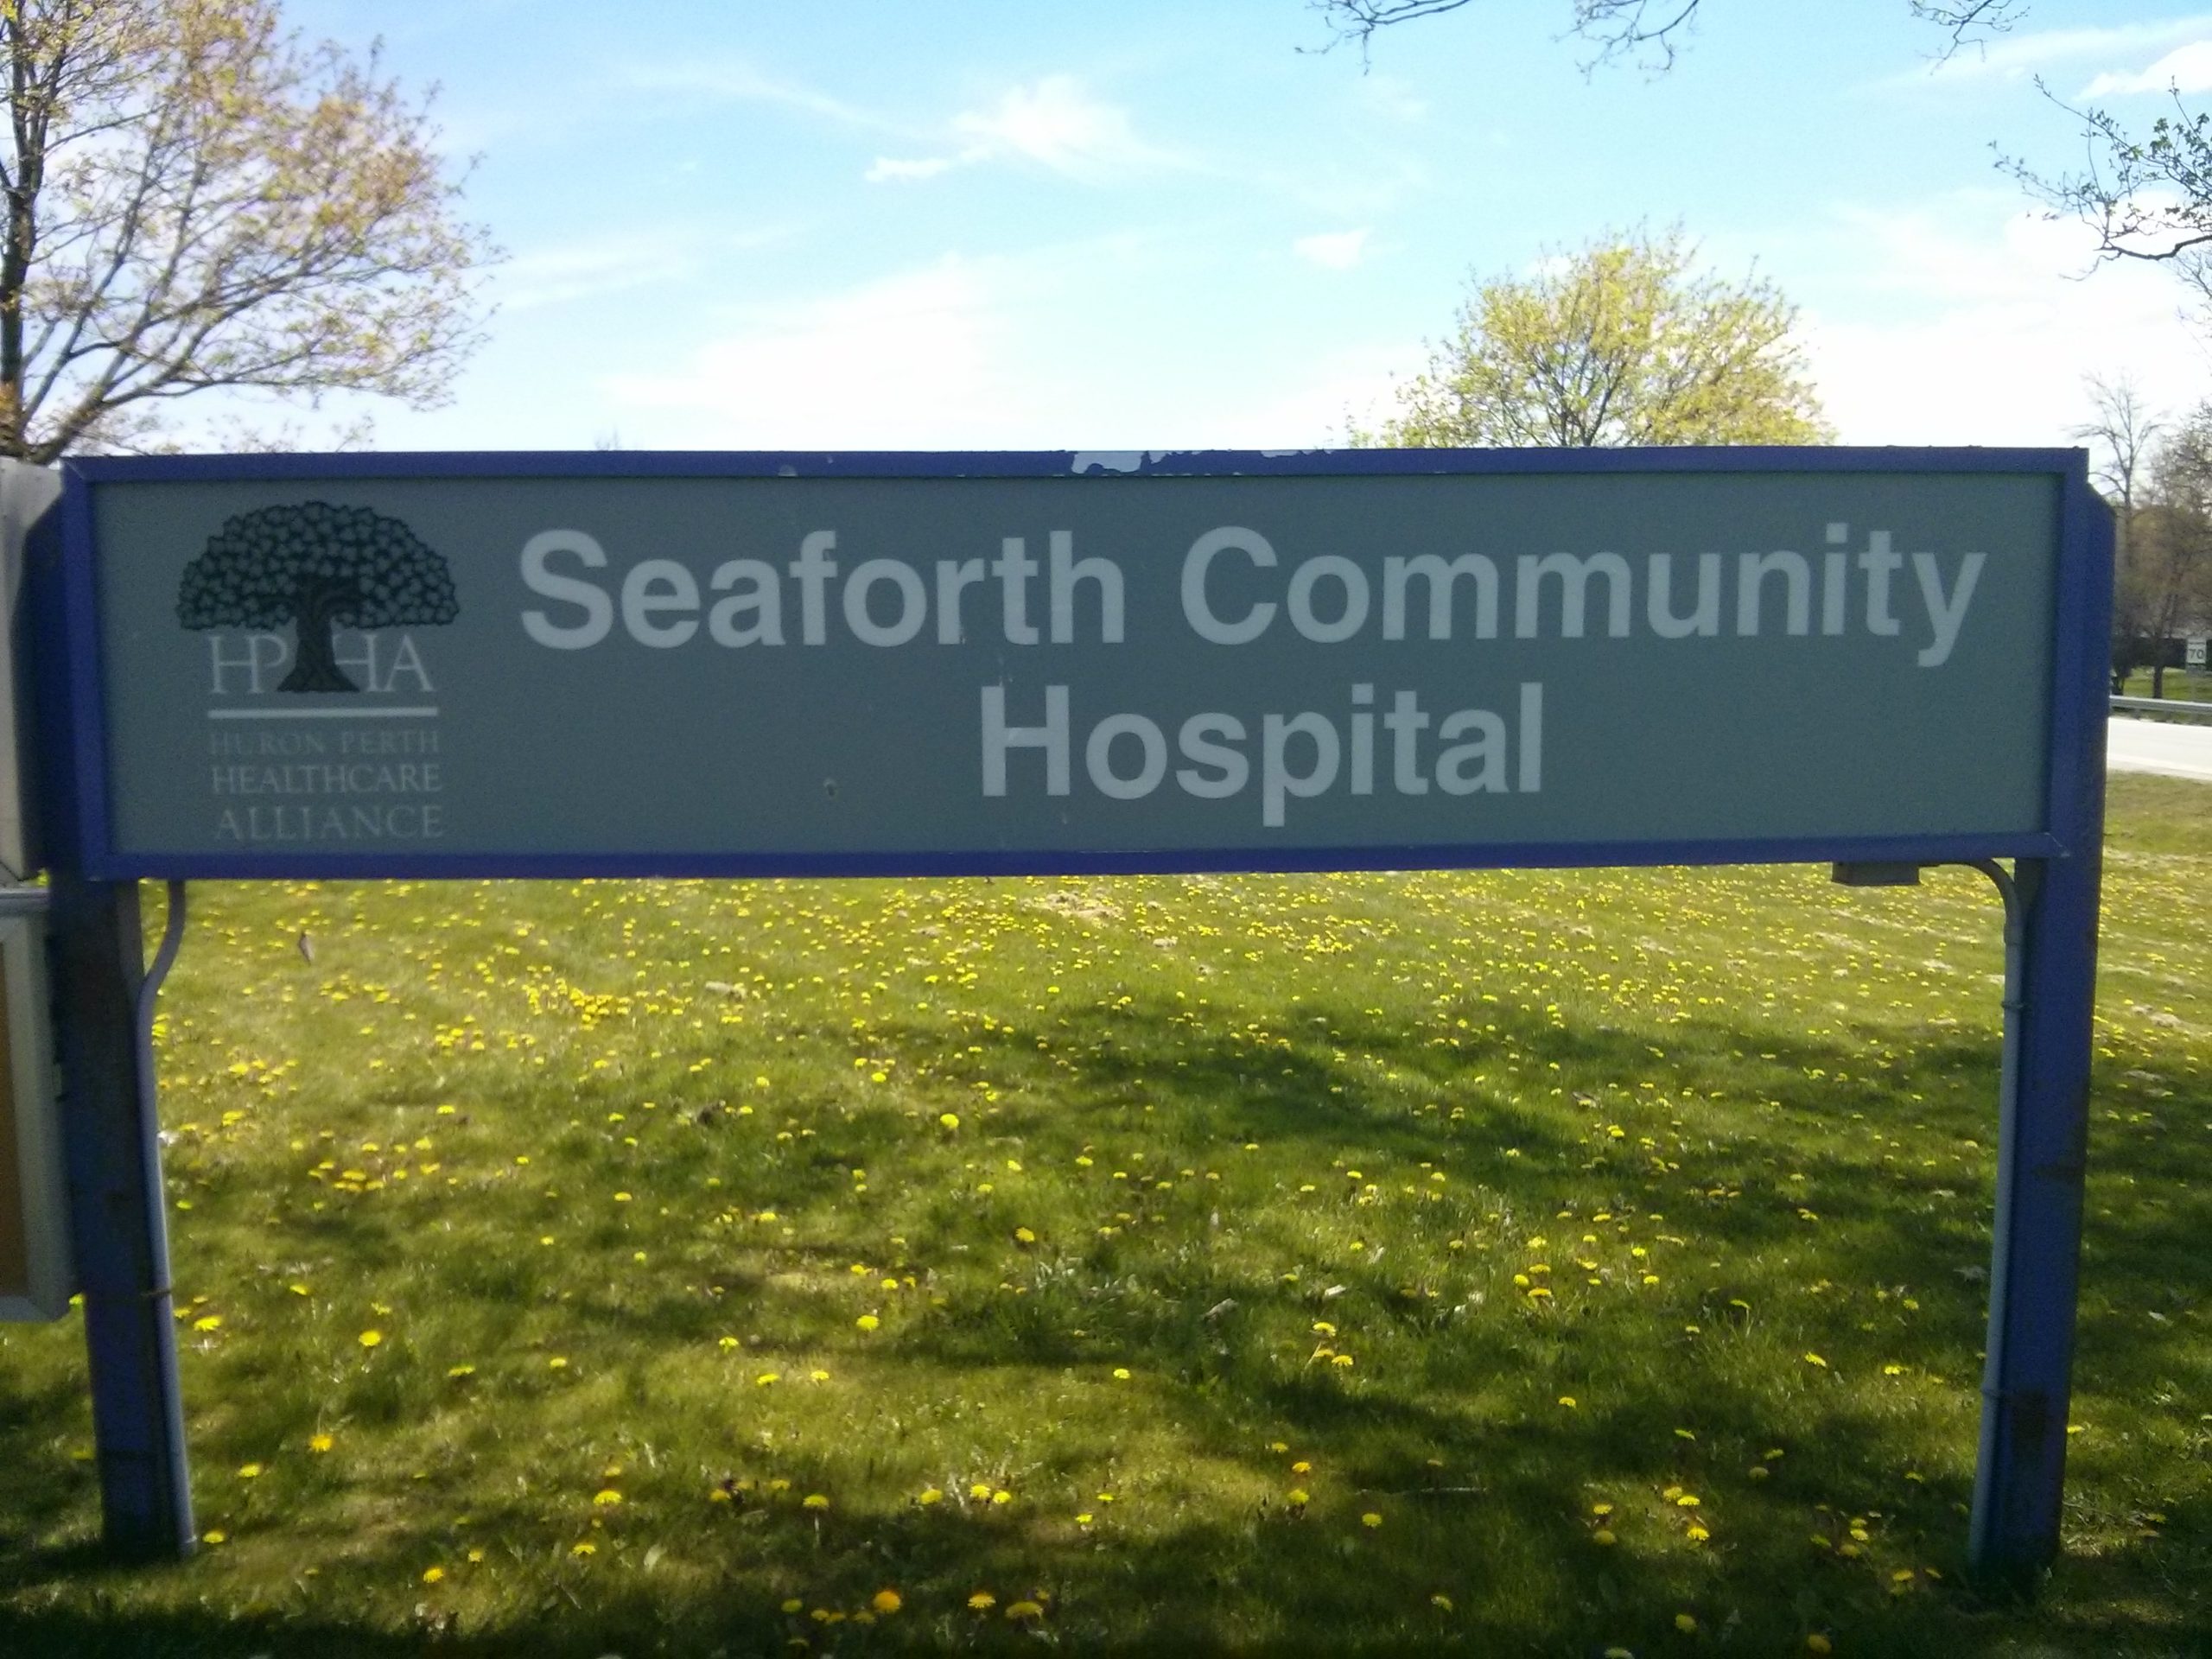 seaforth community hospital foundation pledging significant funding over next two years scaled